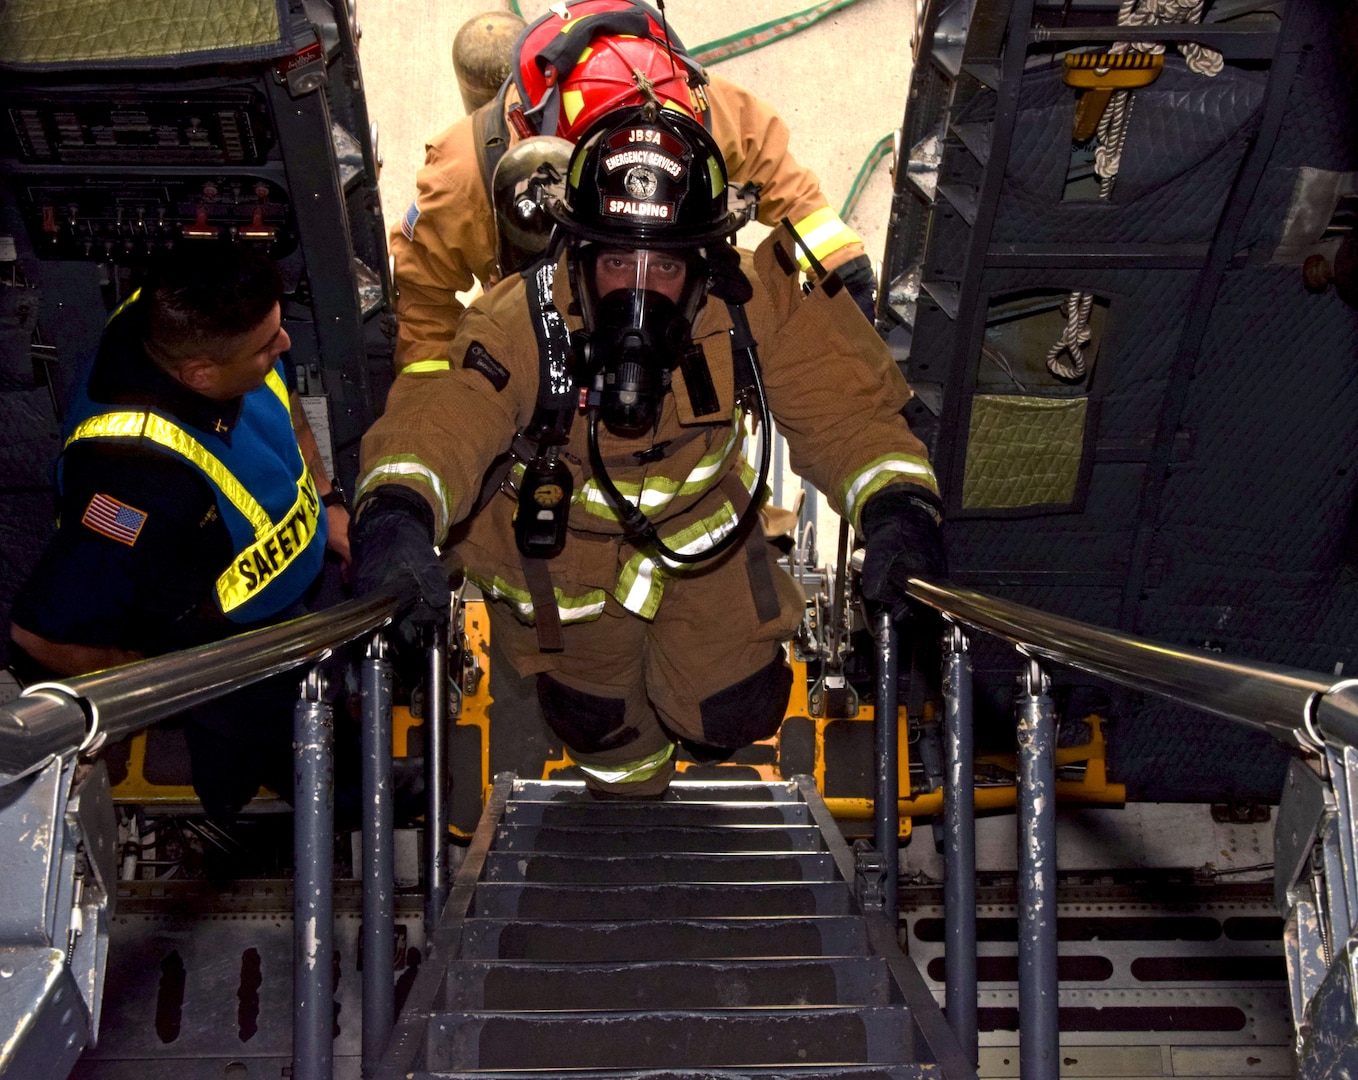 Jake Spalding and Leonard Gerlich, 902nd Civil Engineer Squadron firefighters, ascend stairs leading to a C-5M Super Galaxy flight deck to check for simulated incapacitated aircrew members during an exercise Nov. 18, 2021, at Joint Base San Antonio-Lackland, Texas. During the event, firefighters simulated extinguishing a main landing gear brake fire and assisting the aircrew with evacuating the aircraft. (U.S. Air Force photo by Samantha Mathison)